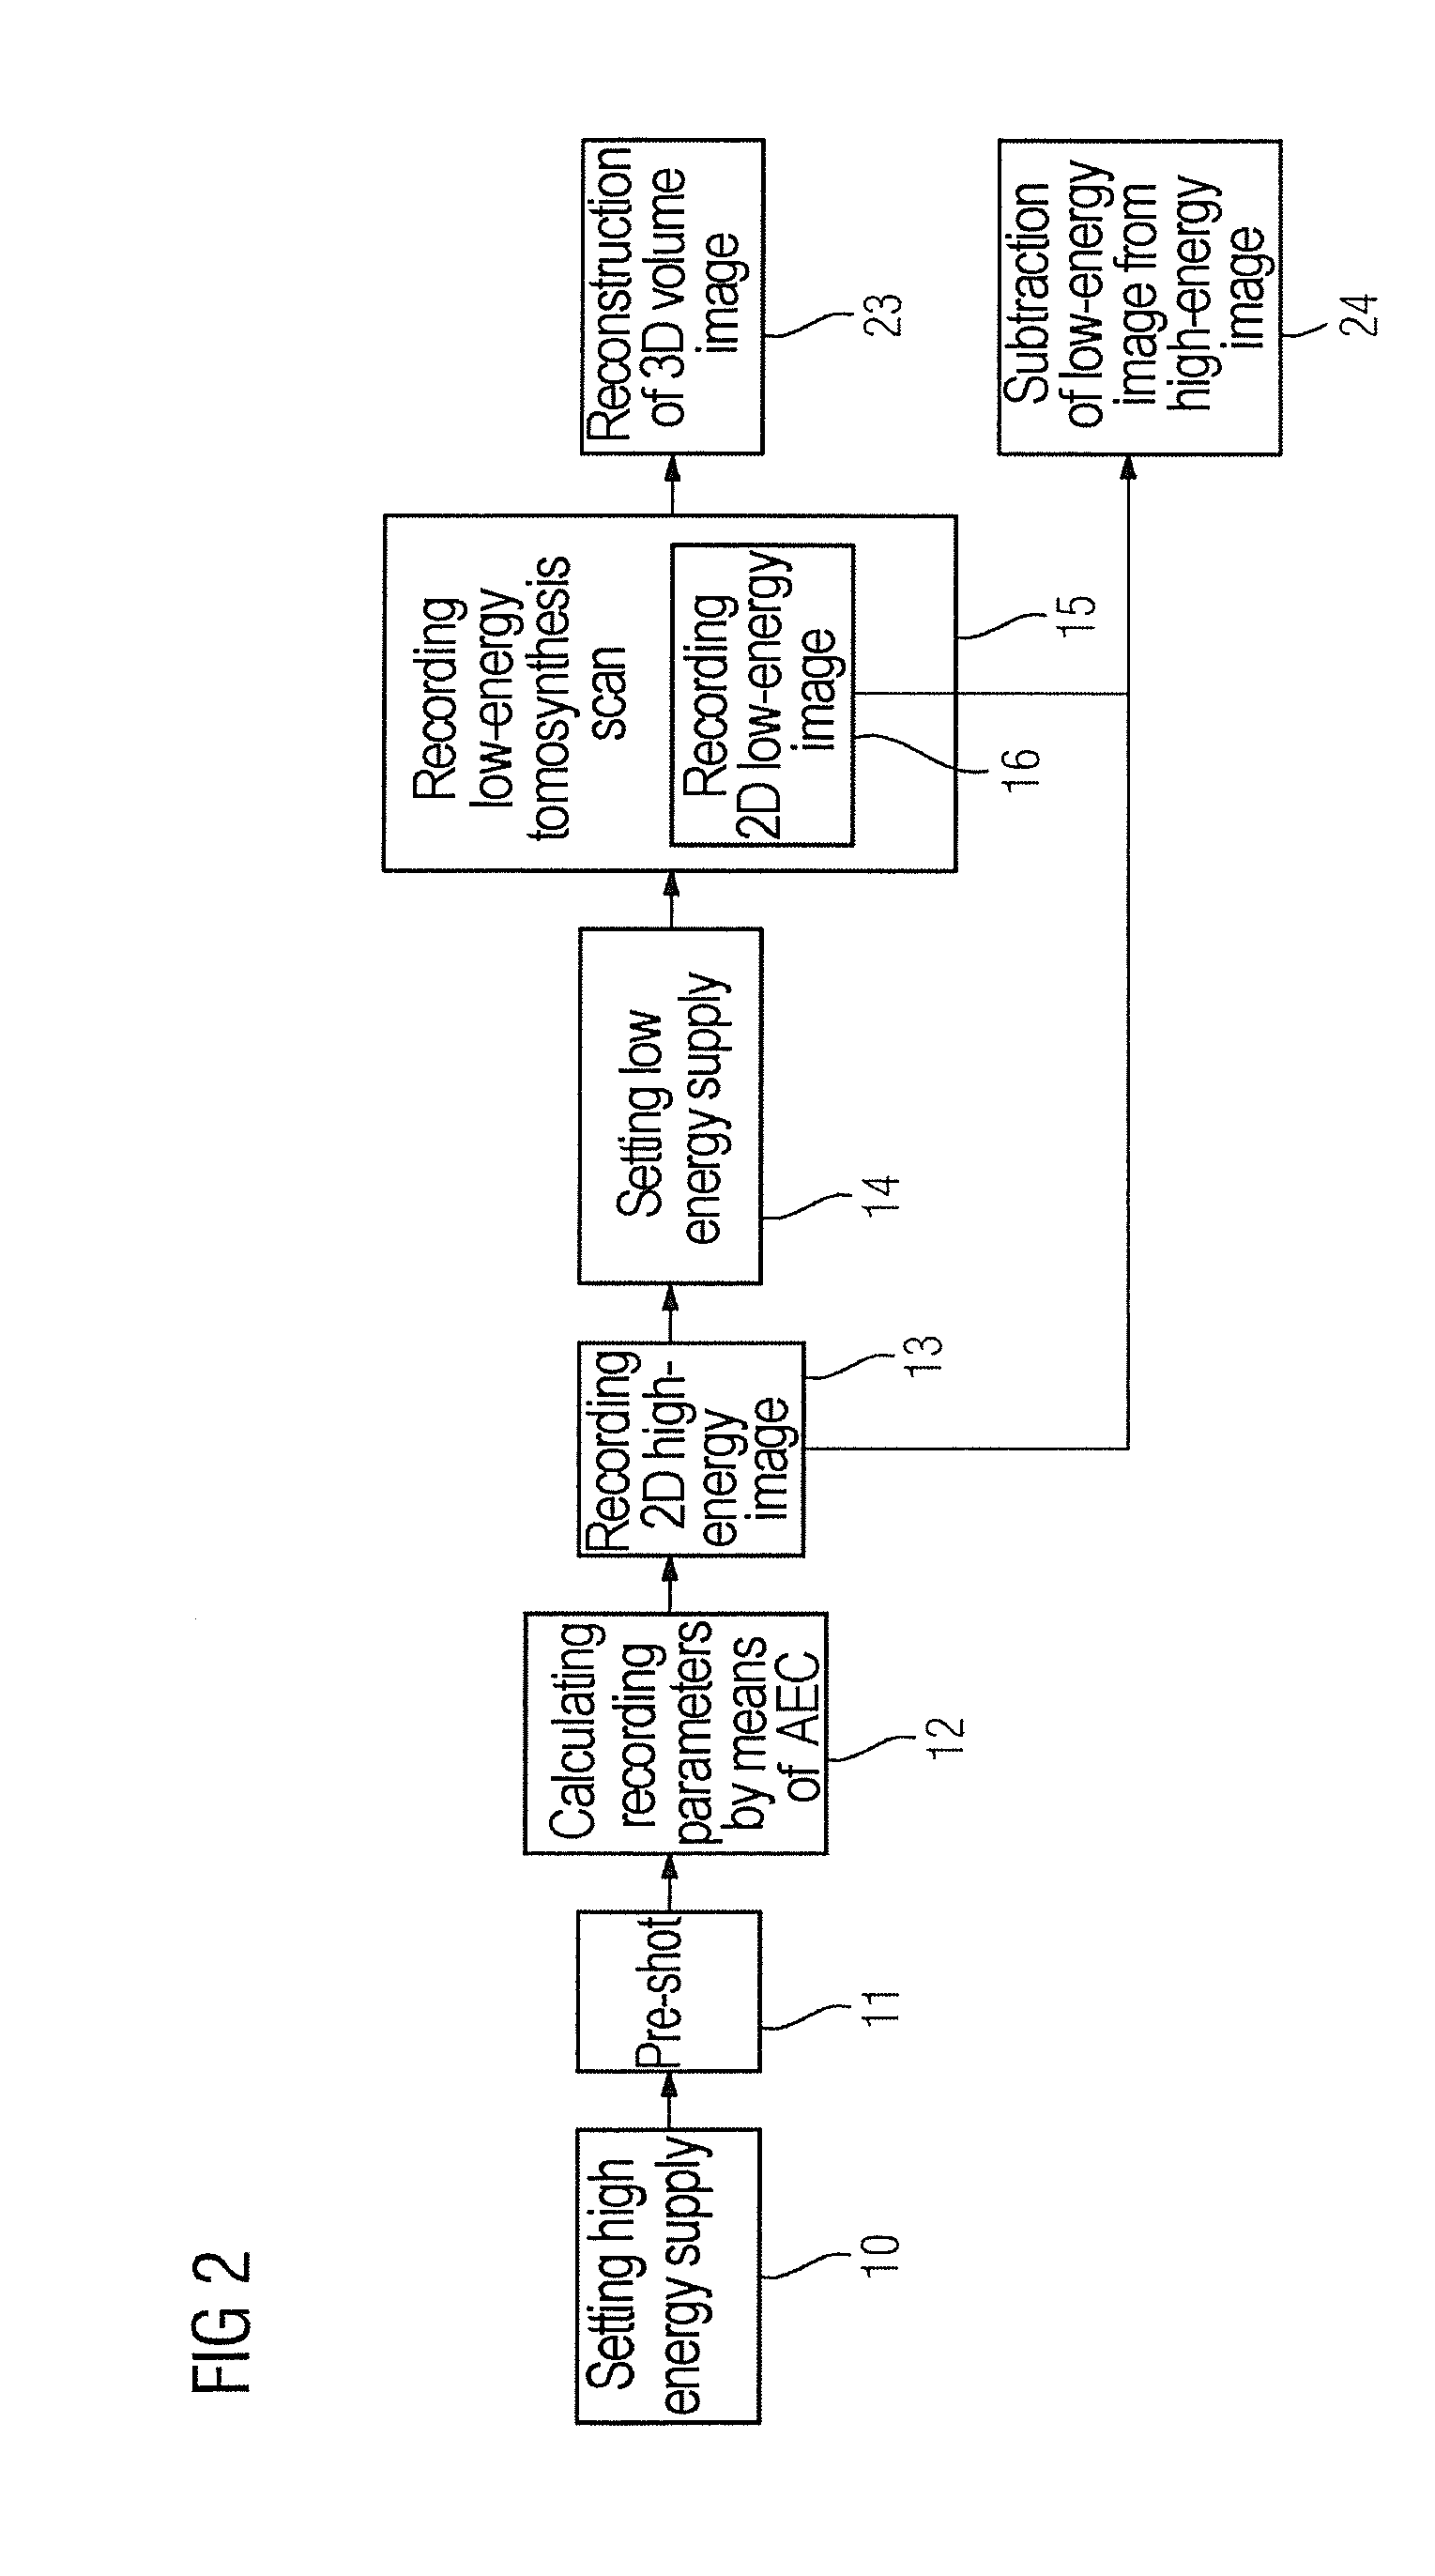 Method and apparatus for combined dual-energy mammography and tomosynthesis imaging